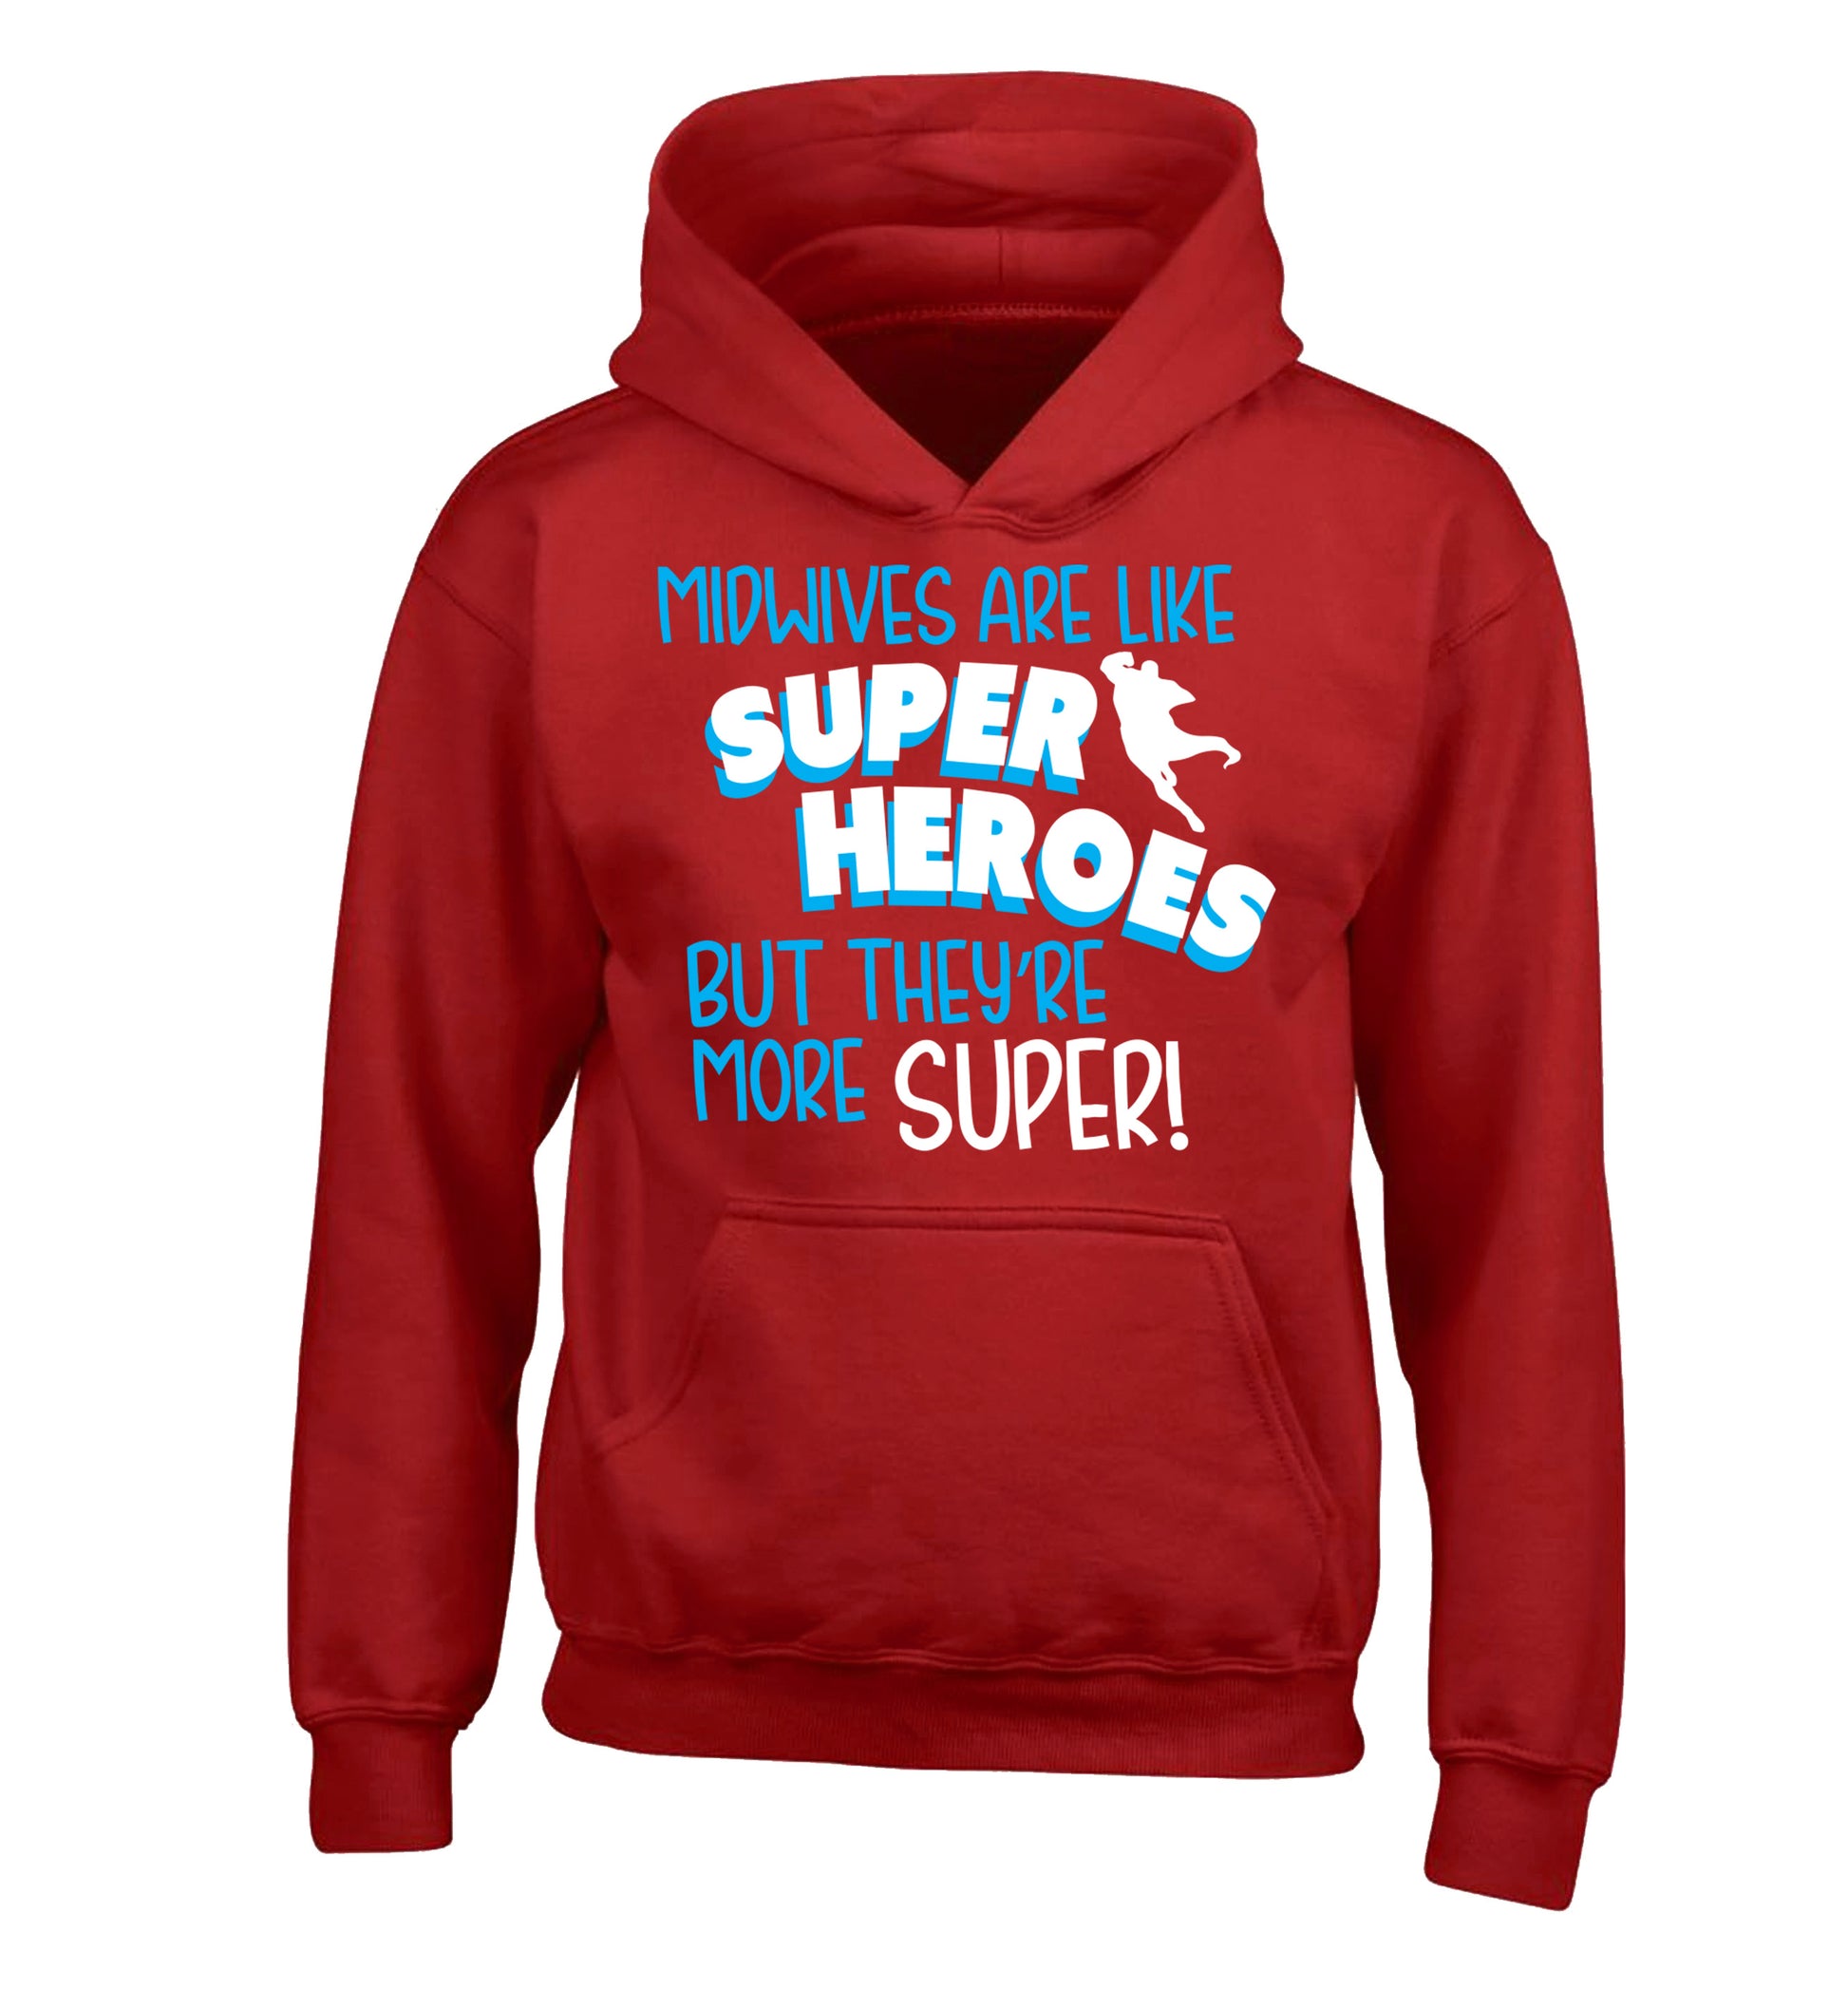 Midwives are like superheros but they're more super children's red hoodie 12-13 Years